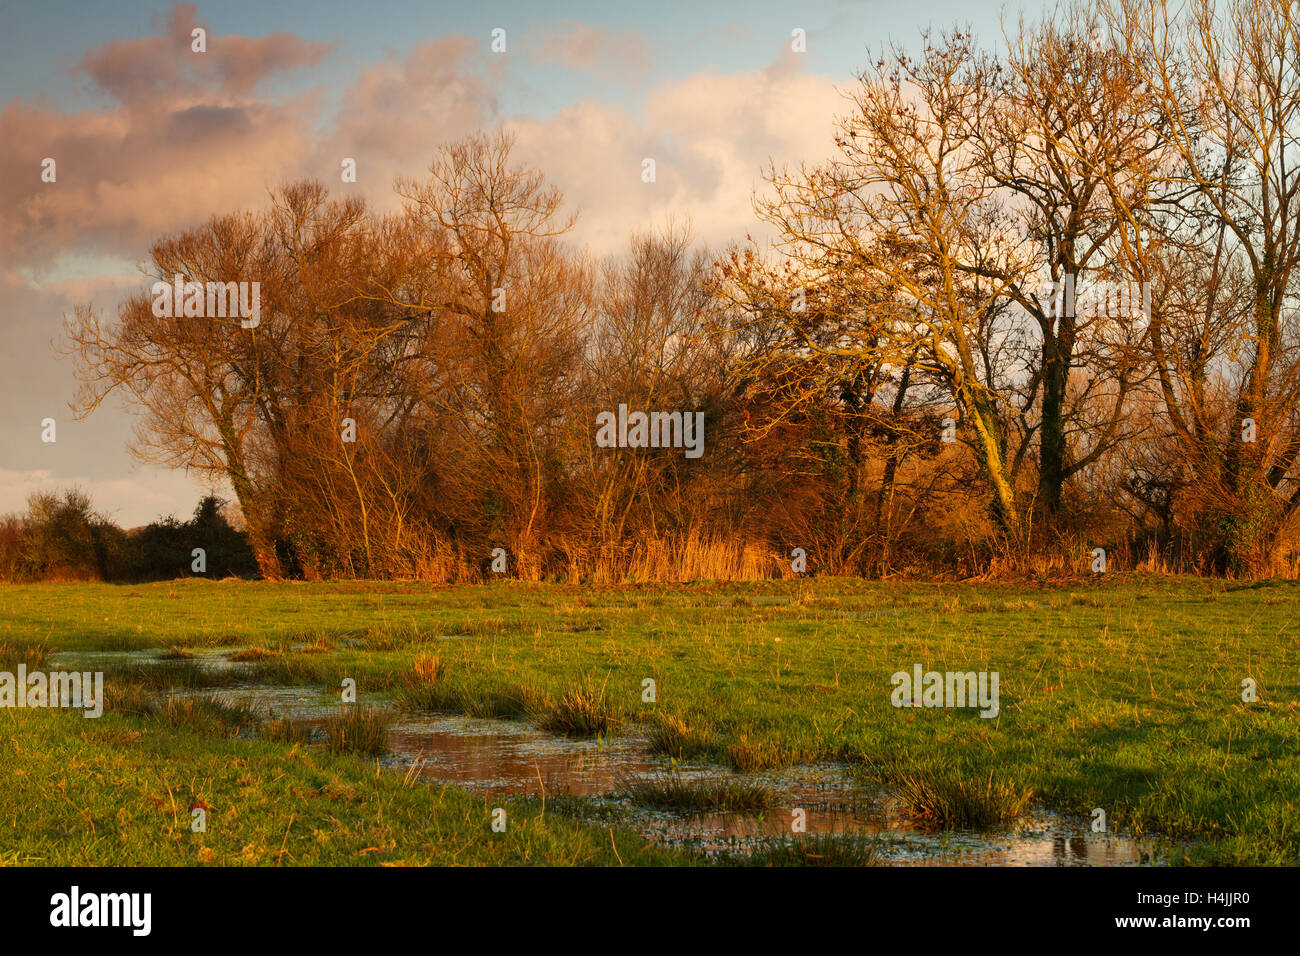 The Meads near Durleigh, Bridgwater, Somerset, England, United Kingdom, Europe Stock Photo